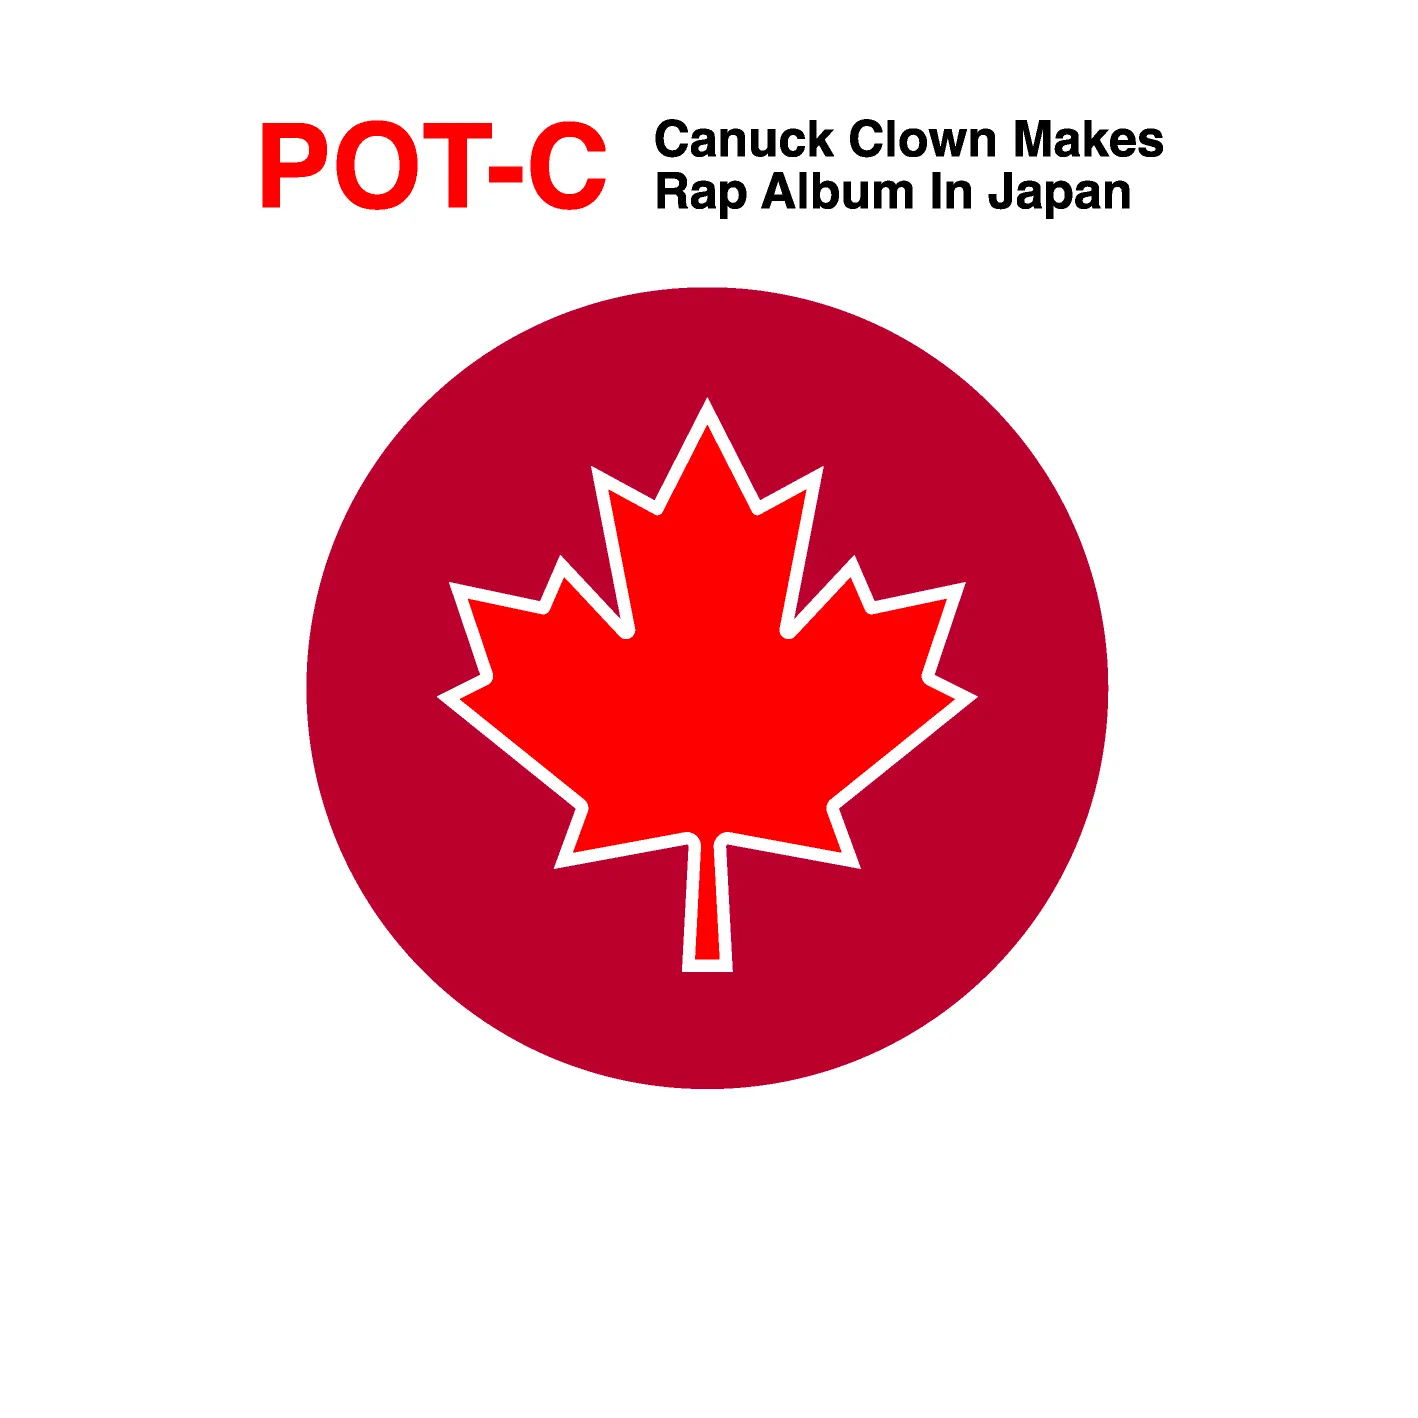 Cover art for “Canuck Clown Makes Rap Album In Japan” by Pot-C